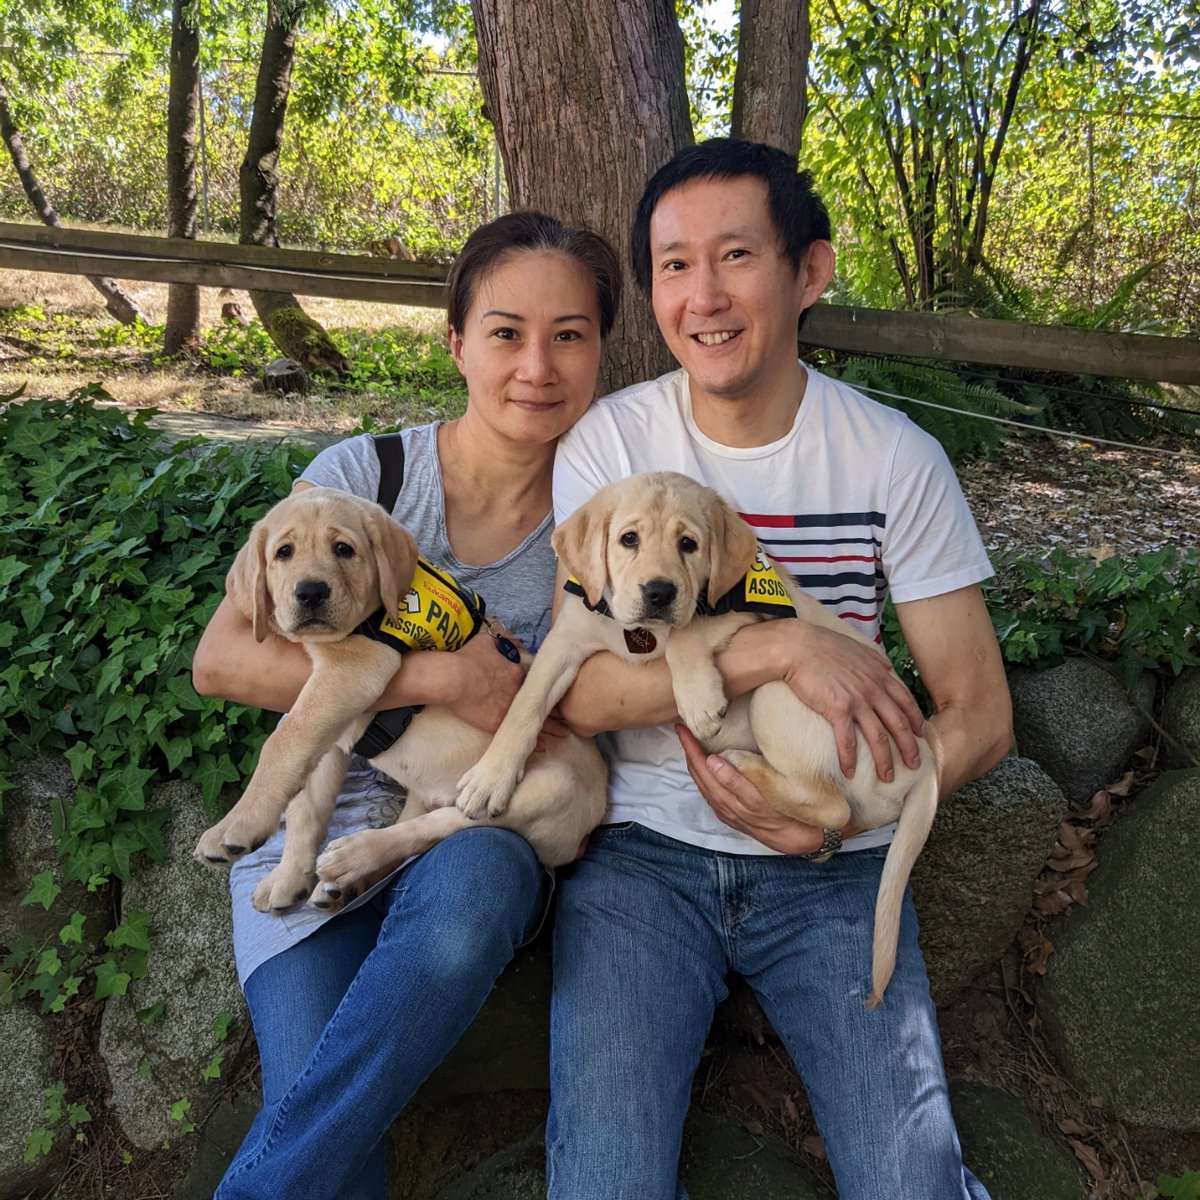 The UNESCO Heritage Site litter are now making history as Puppies-In-Training! 💗Taj met Annika ❤️Rila will be meeting new friends at Can Do Canines in New Hope, Minnesota 💚Petra will soon travel to Alberta to meet Amy and Andrew